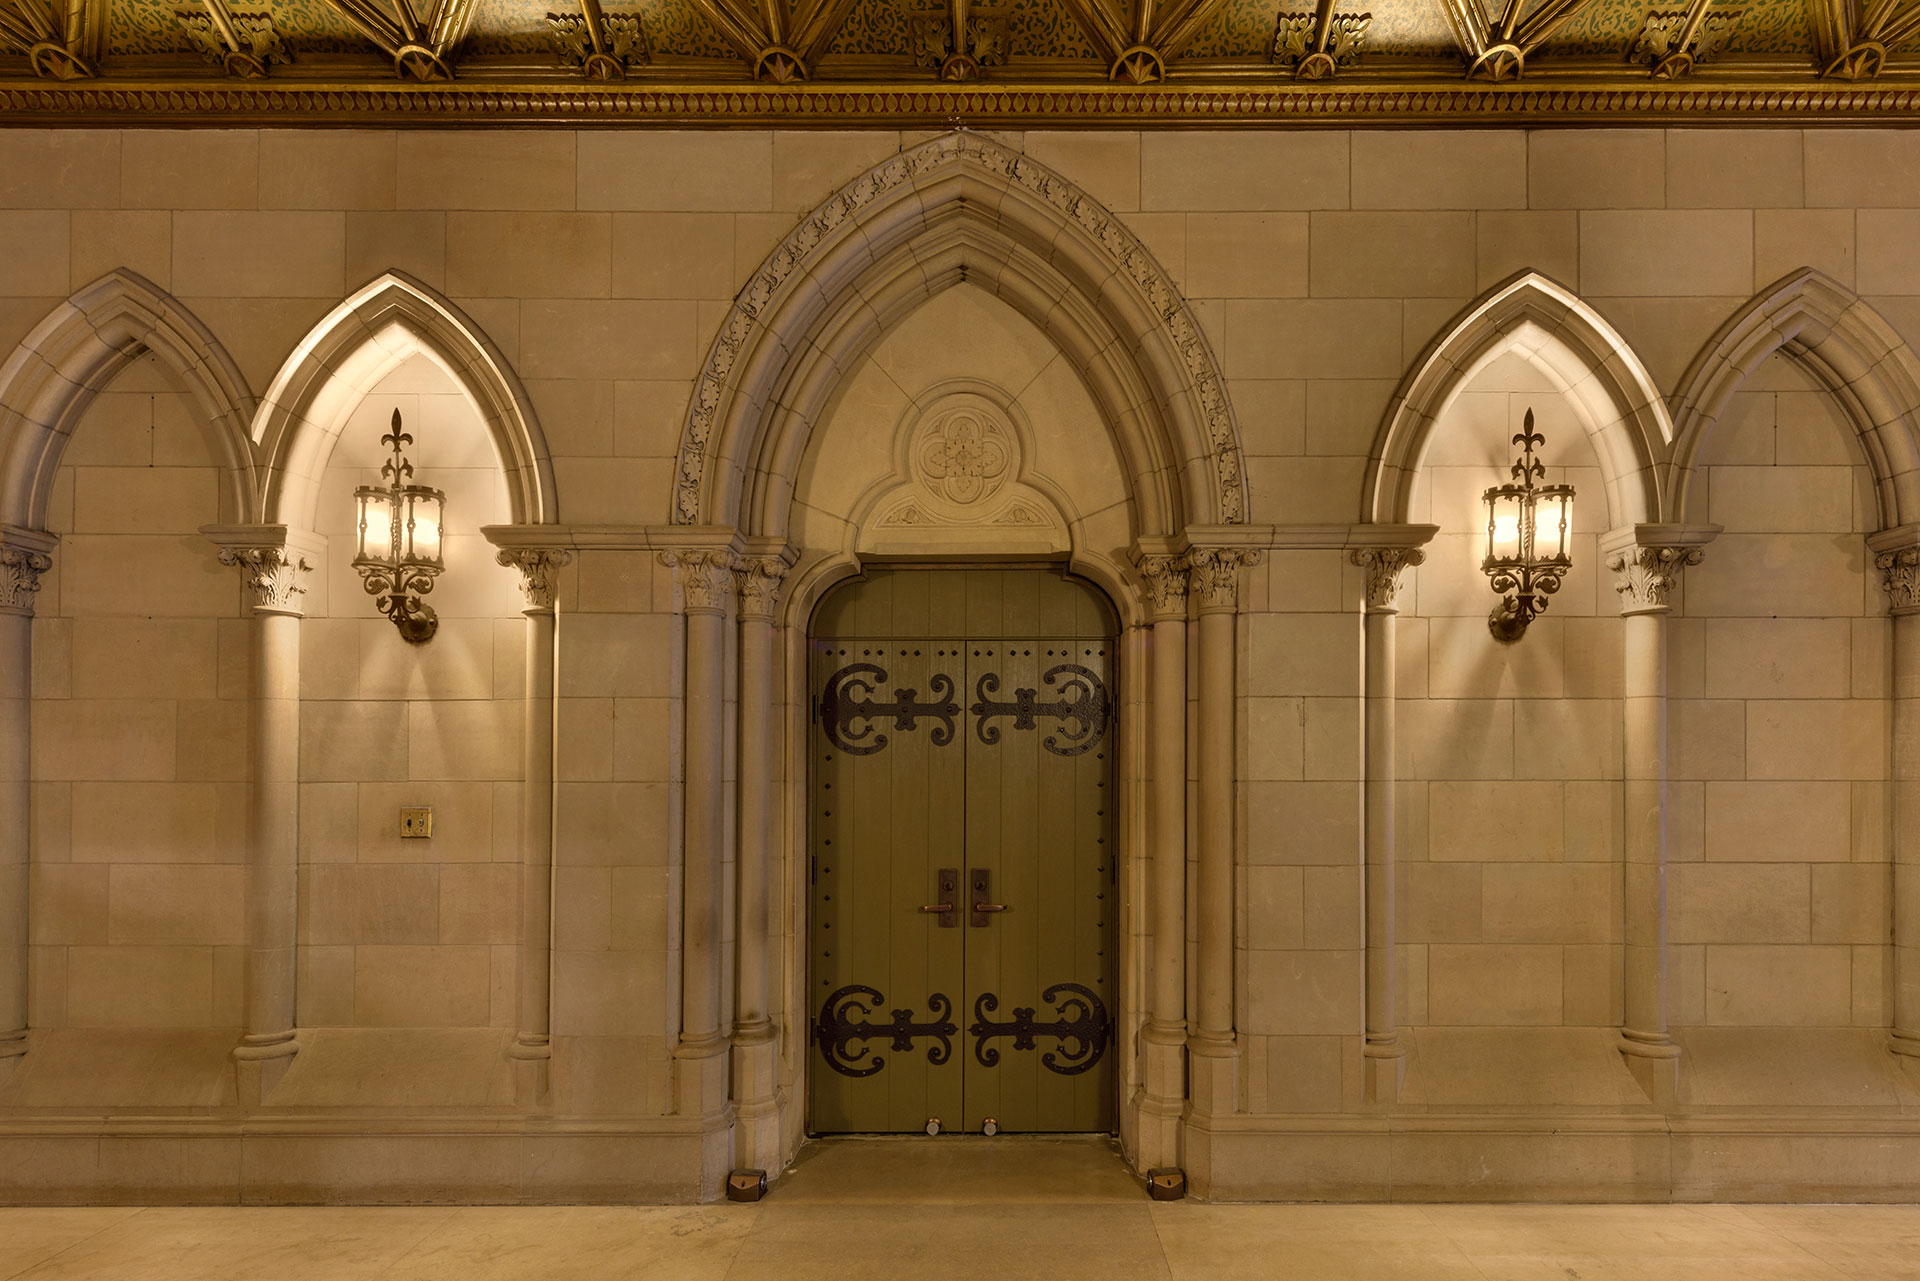 Fire Rated Replica Doors at Chicago Temple First United Methodist Church Match Original Doors Exactly